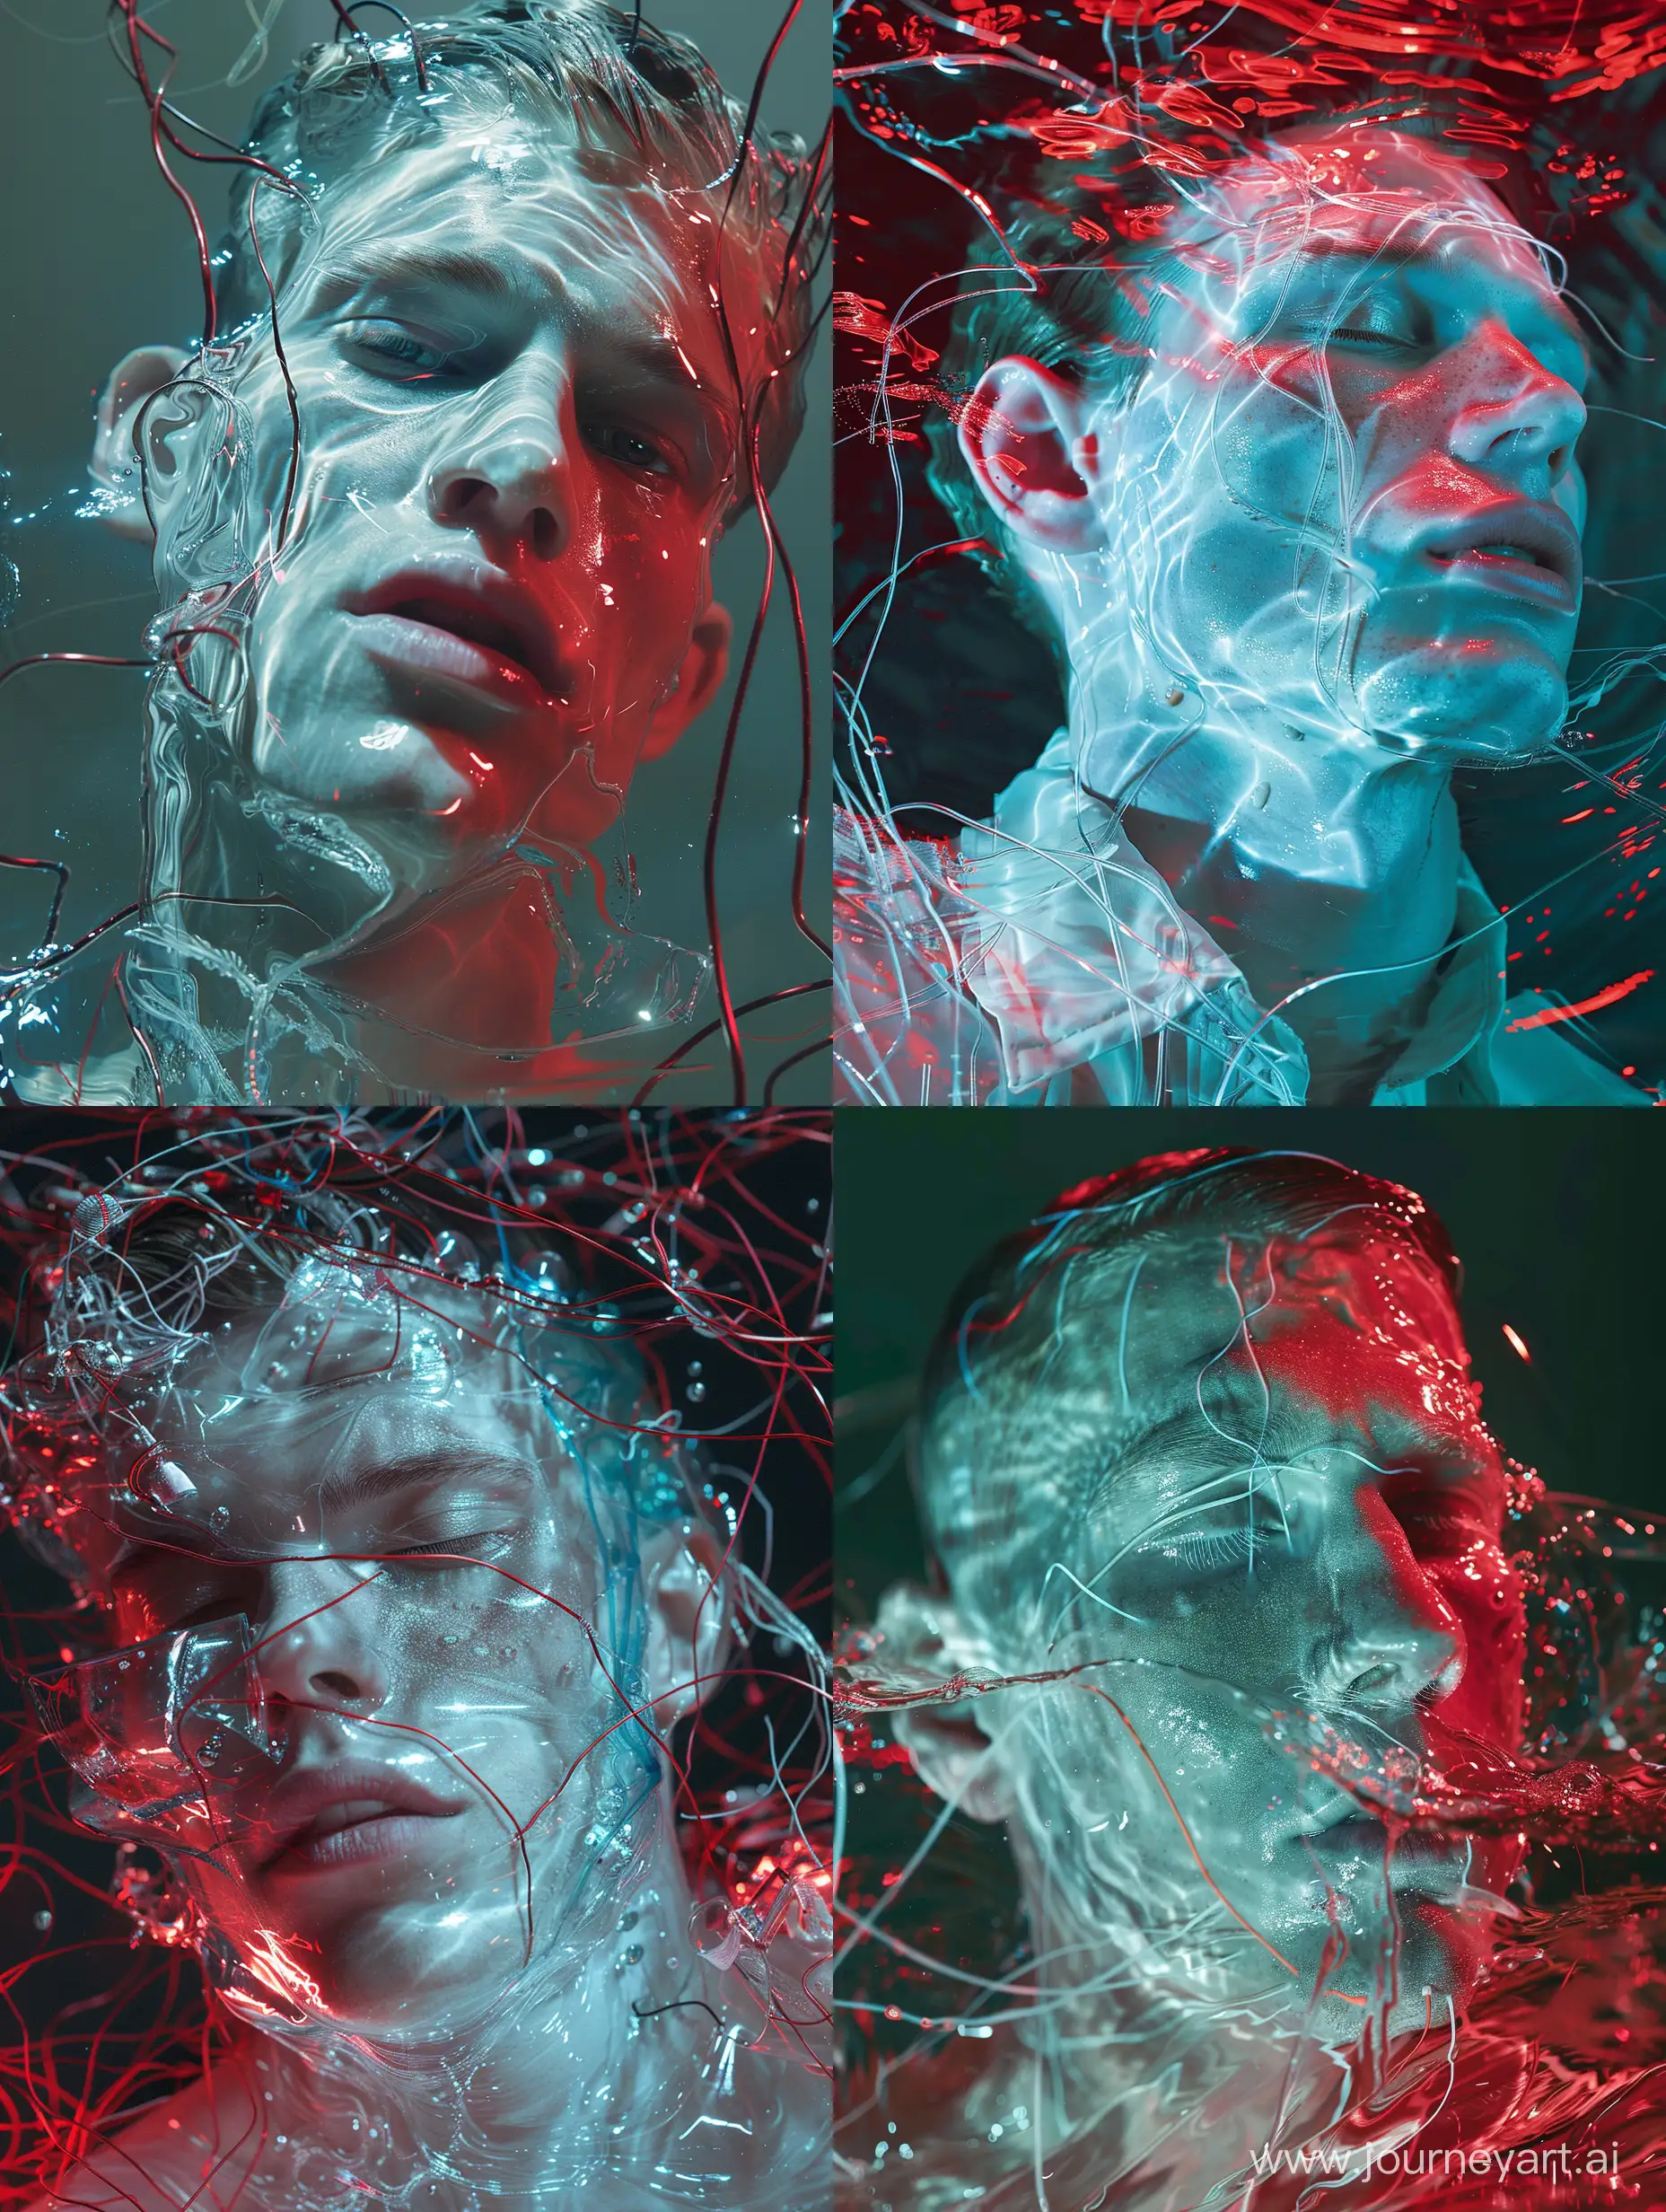 Tim Walker's haute-couture frontal portrait of clear white ethereal man with translucent skin drowning in sea of wires. Red and cyan hues, glowing highlights, dark shadows --v 6.0